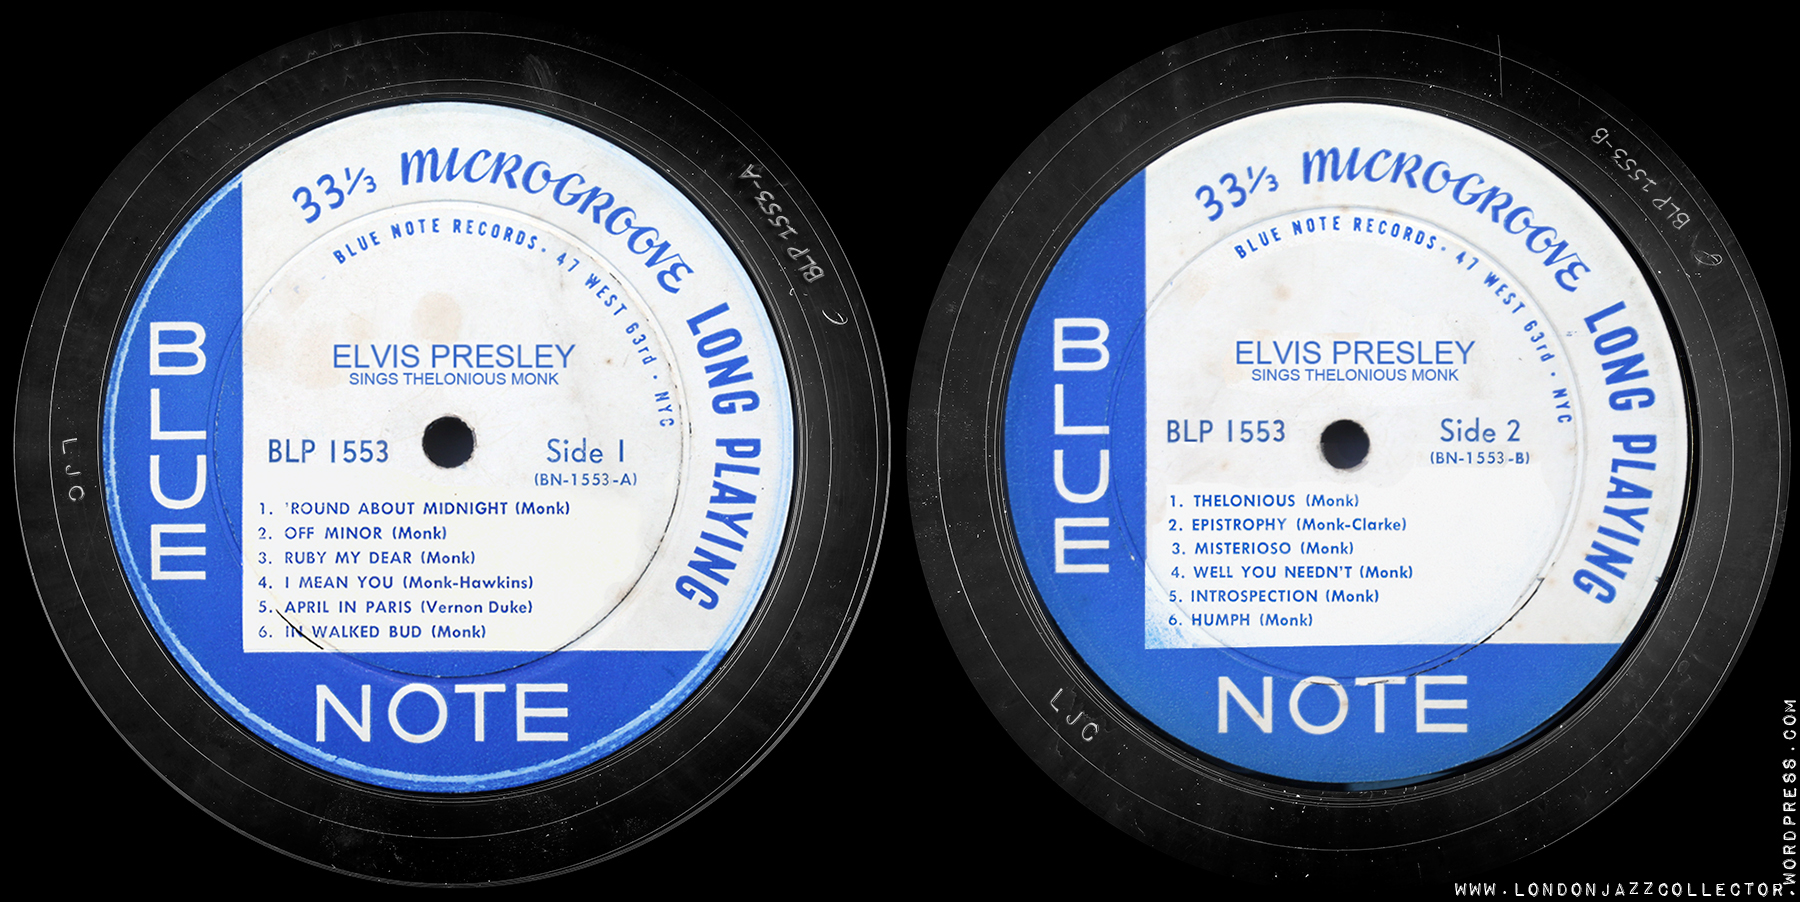 Missing-Blue-Note-labels-1553–runout-1800-LJC | LondonJazzCollector